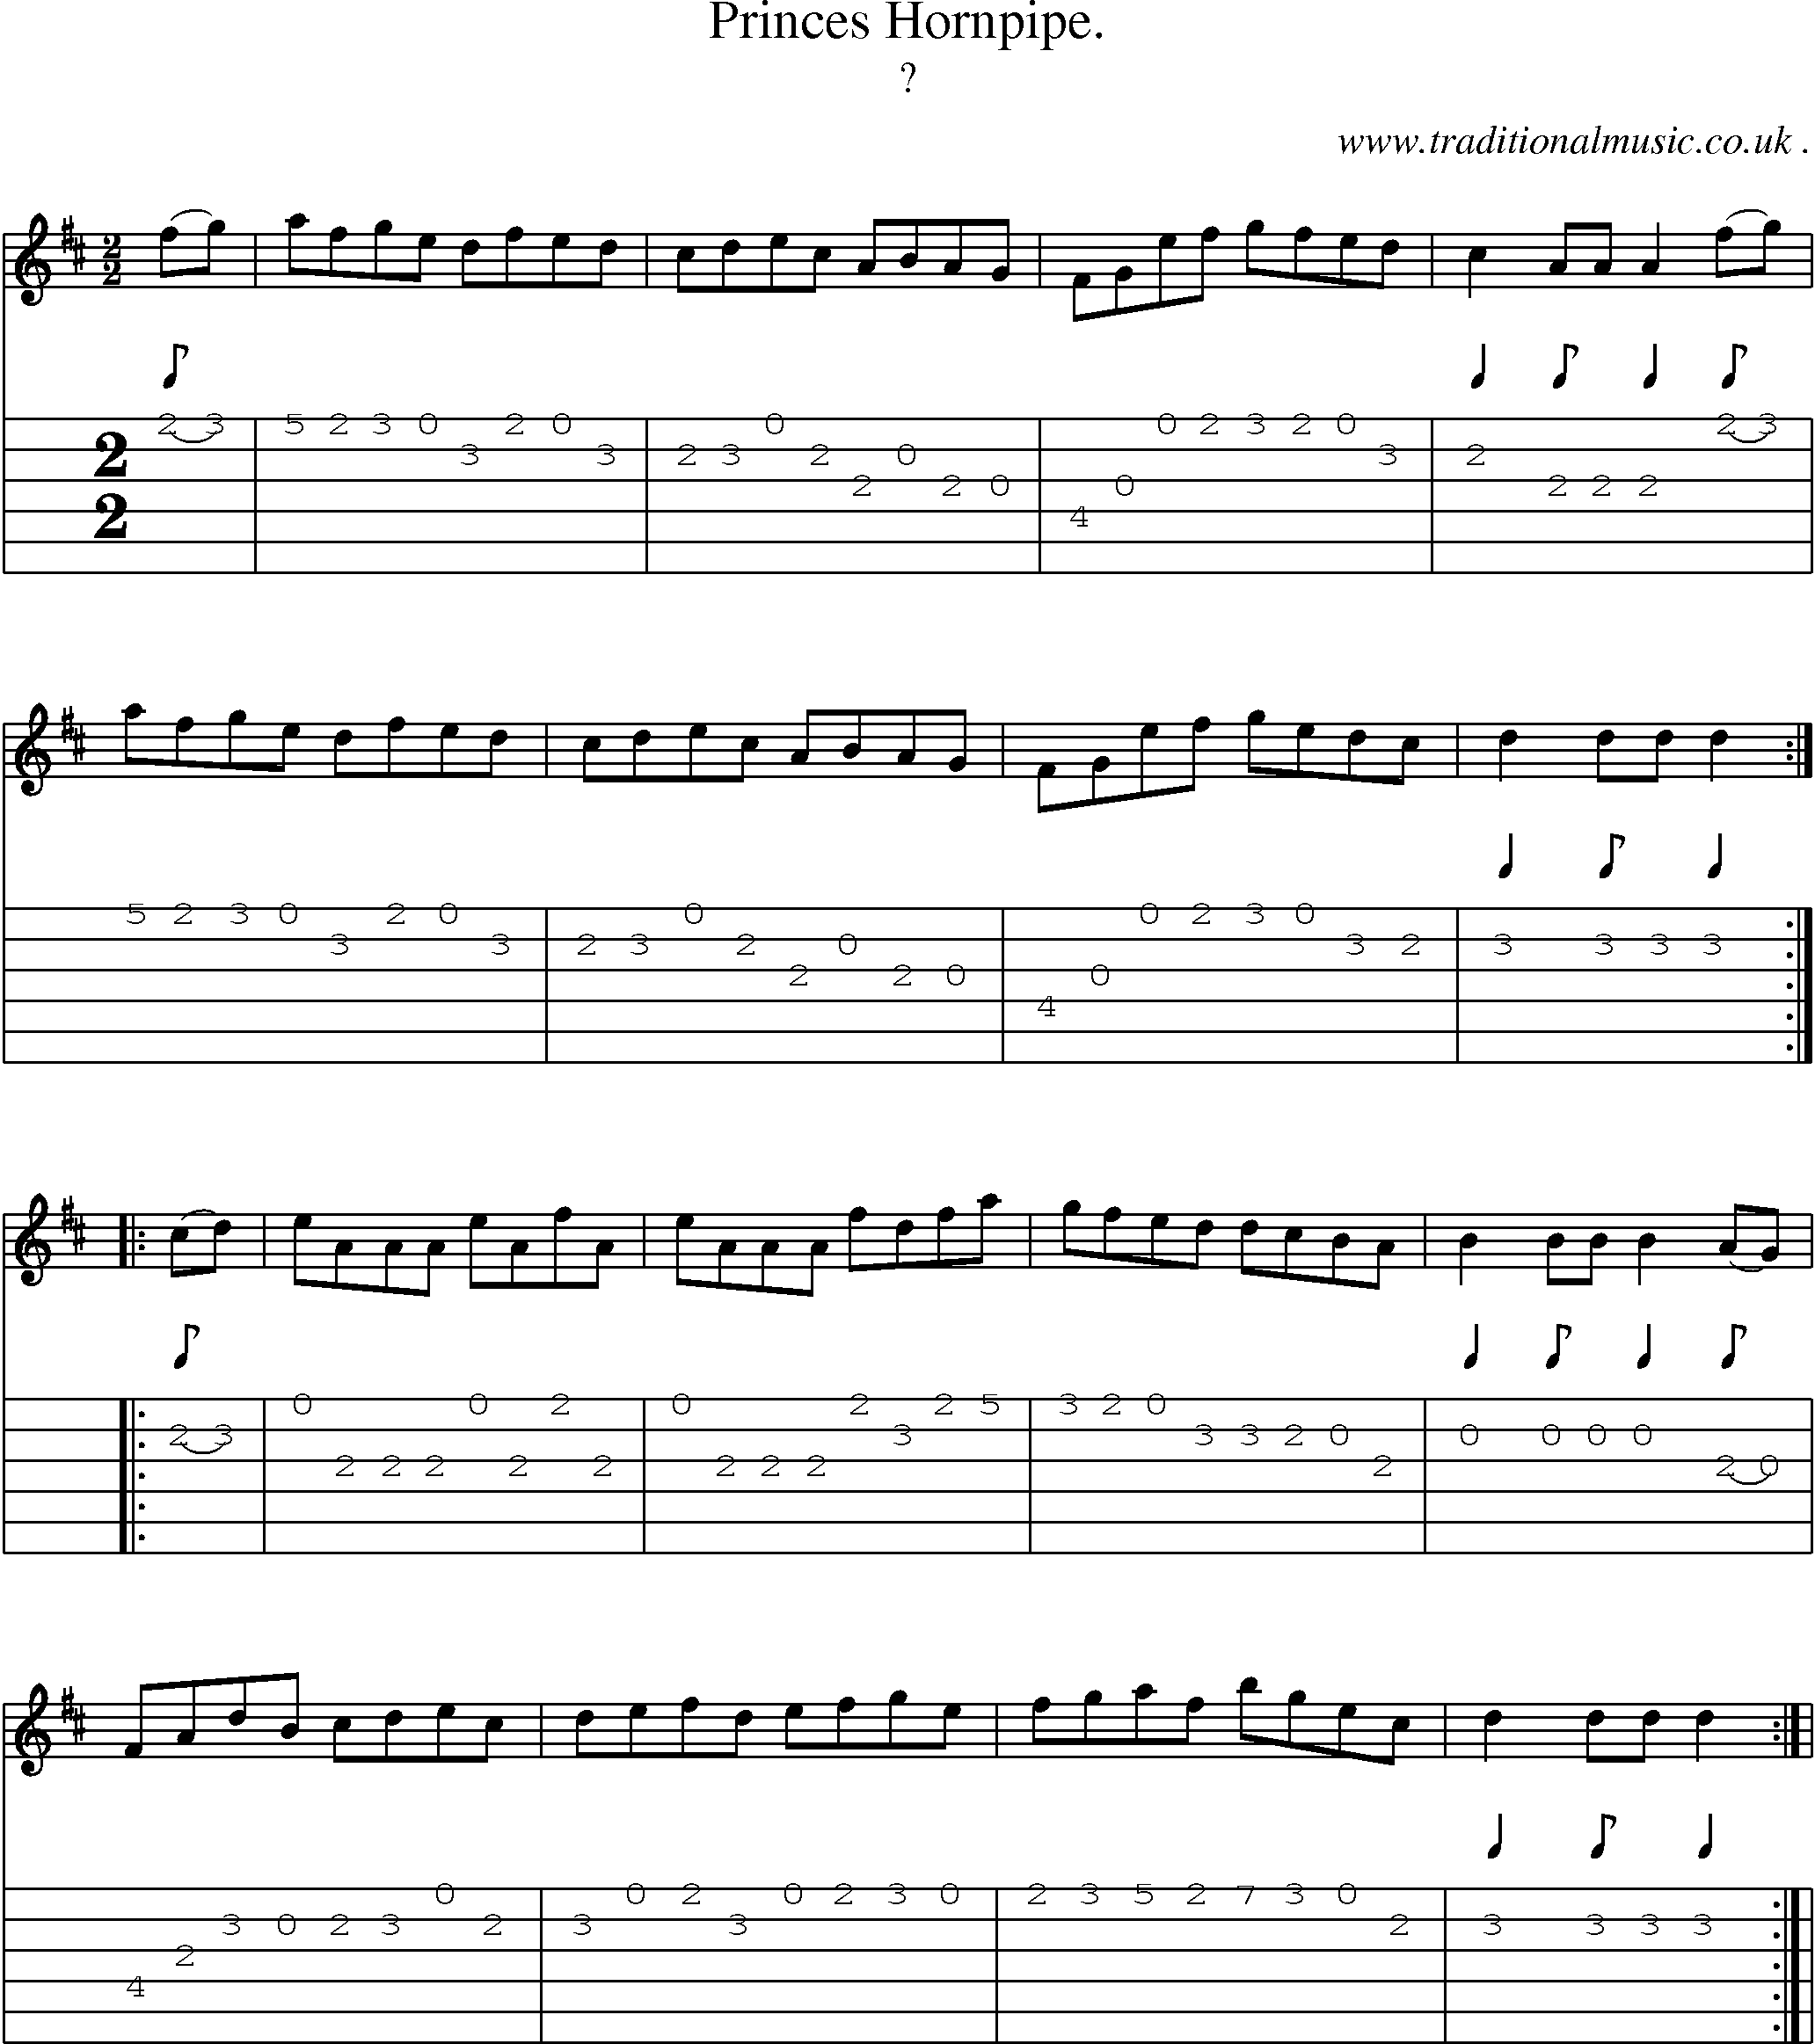 Sheet-Music and Guitar Tabs for Princes Hornpipe